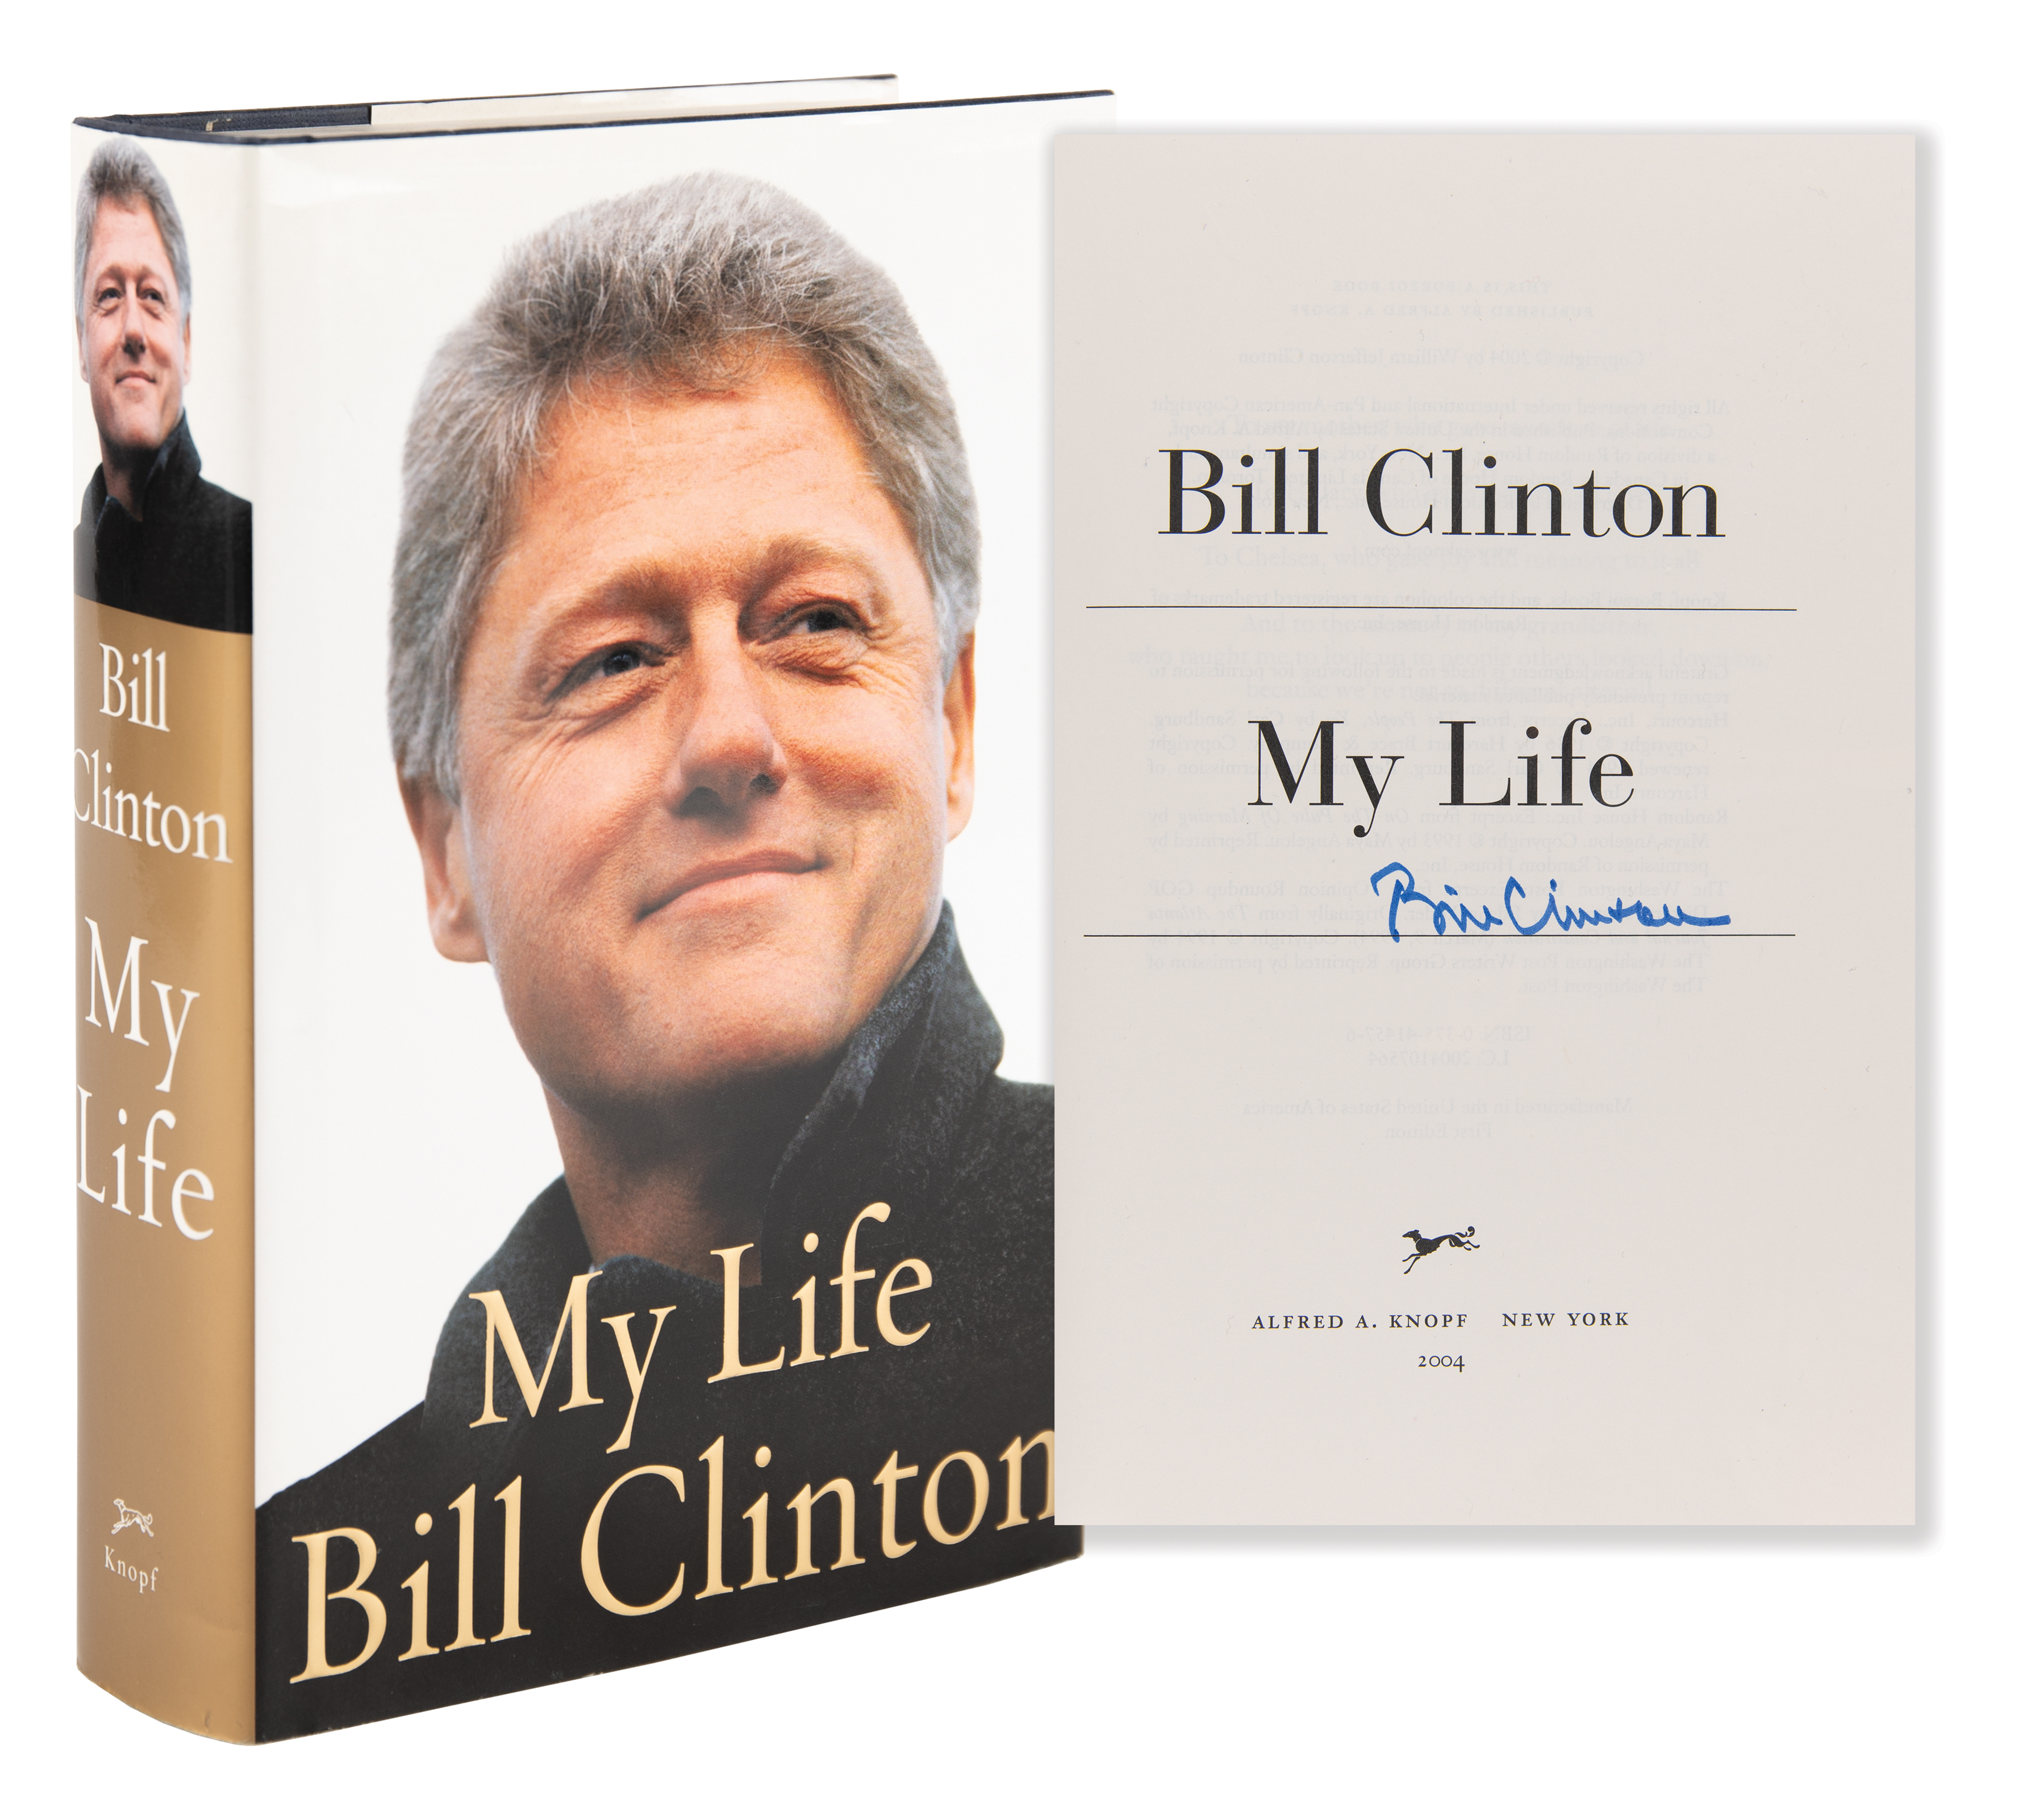 Lot #56 Bill Clinton Signed Book - My Life - Image 1